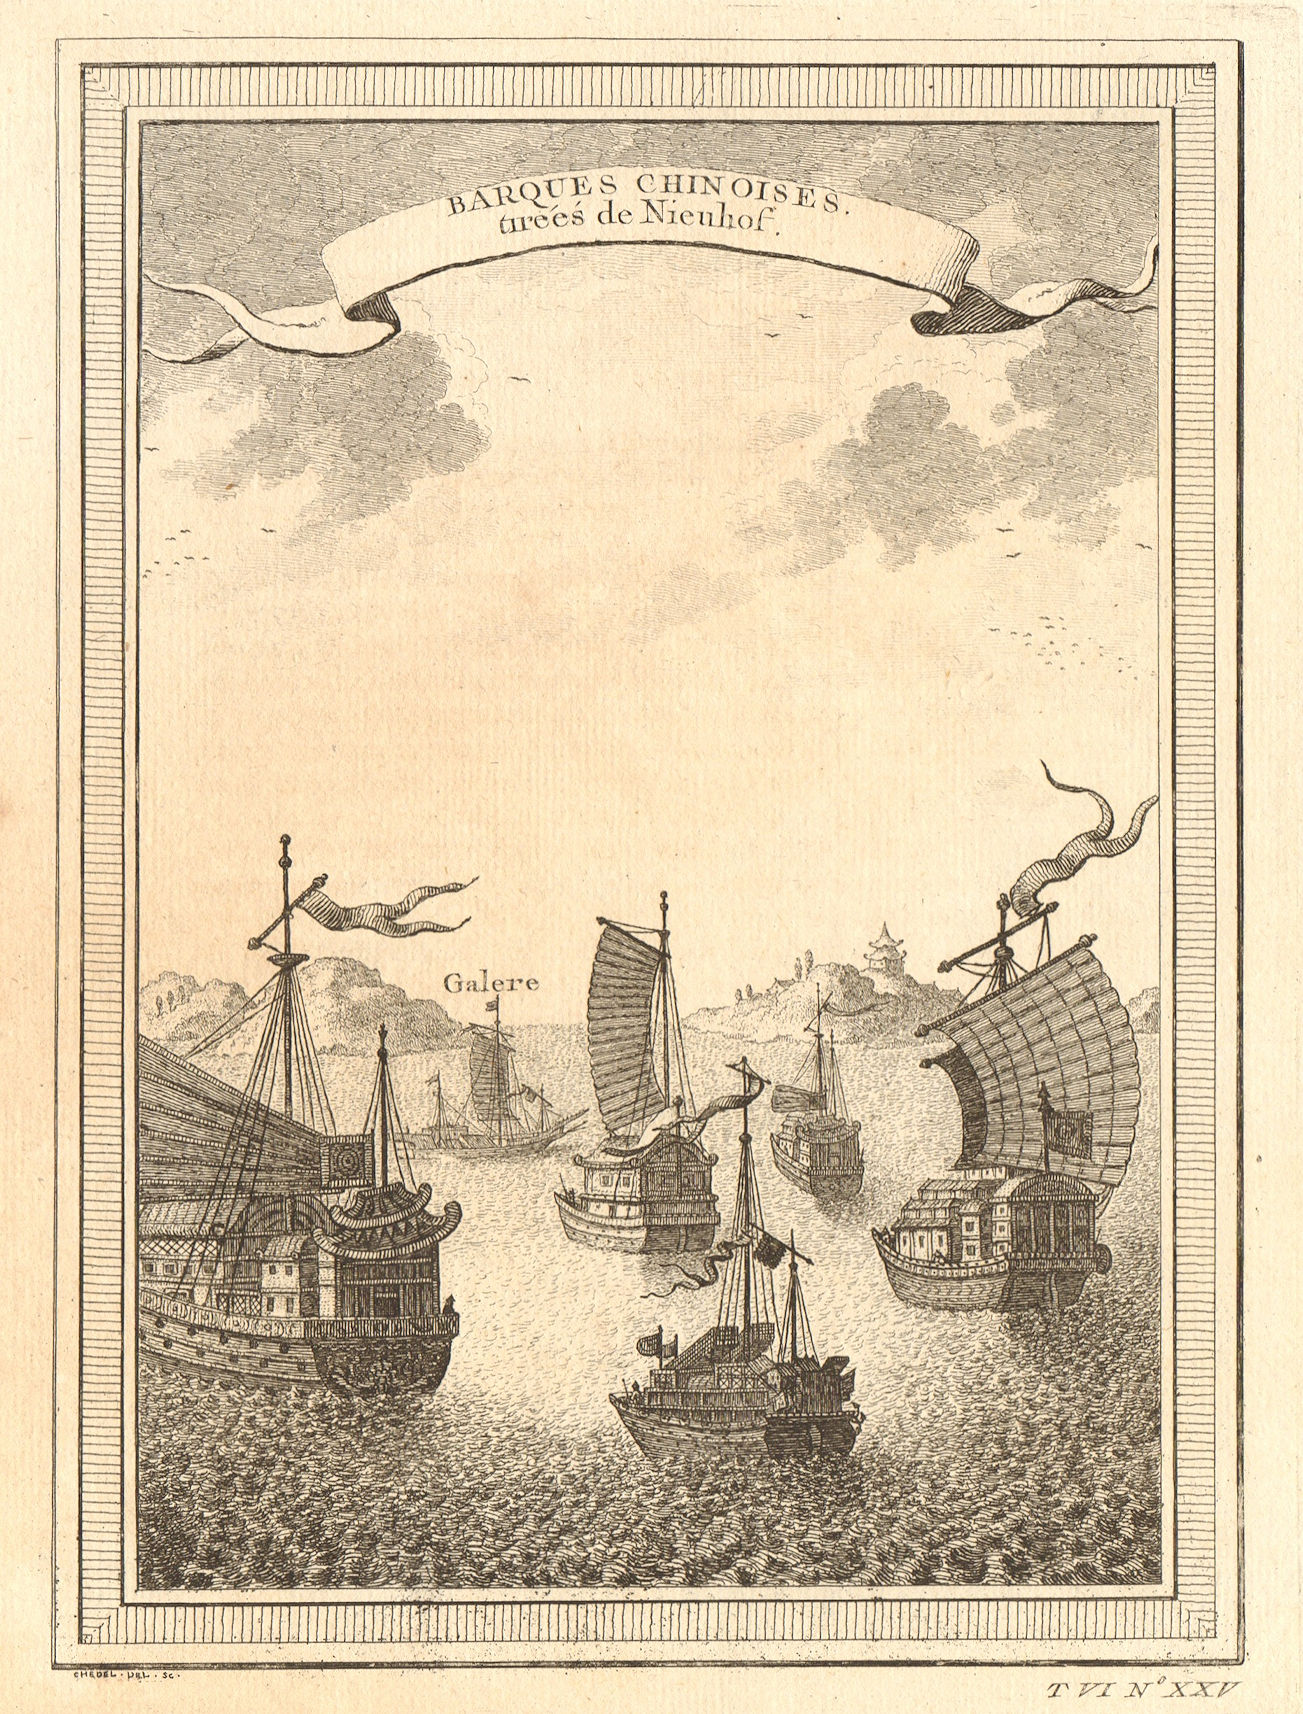 Associate Product 'Barques Chinoises'. China. Chinese junks or boats, from Nieuhof 1748 print